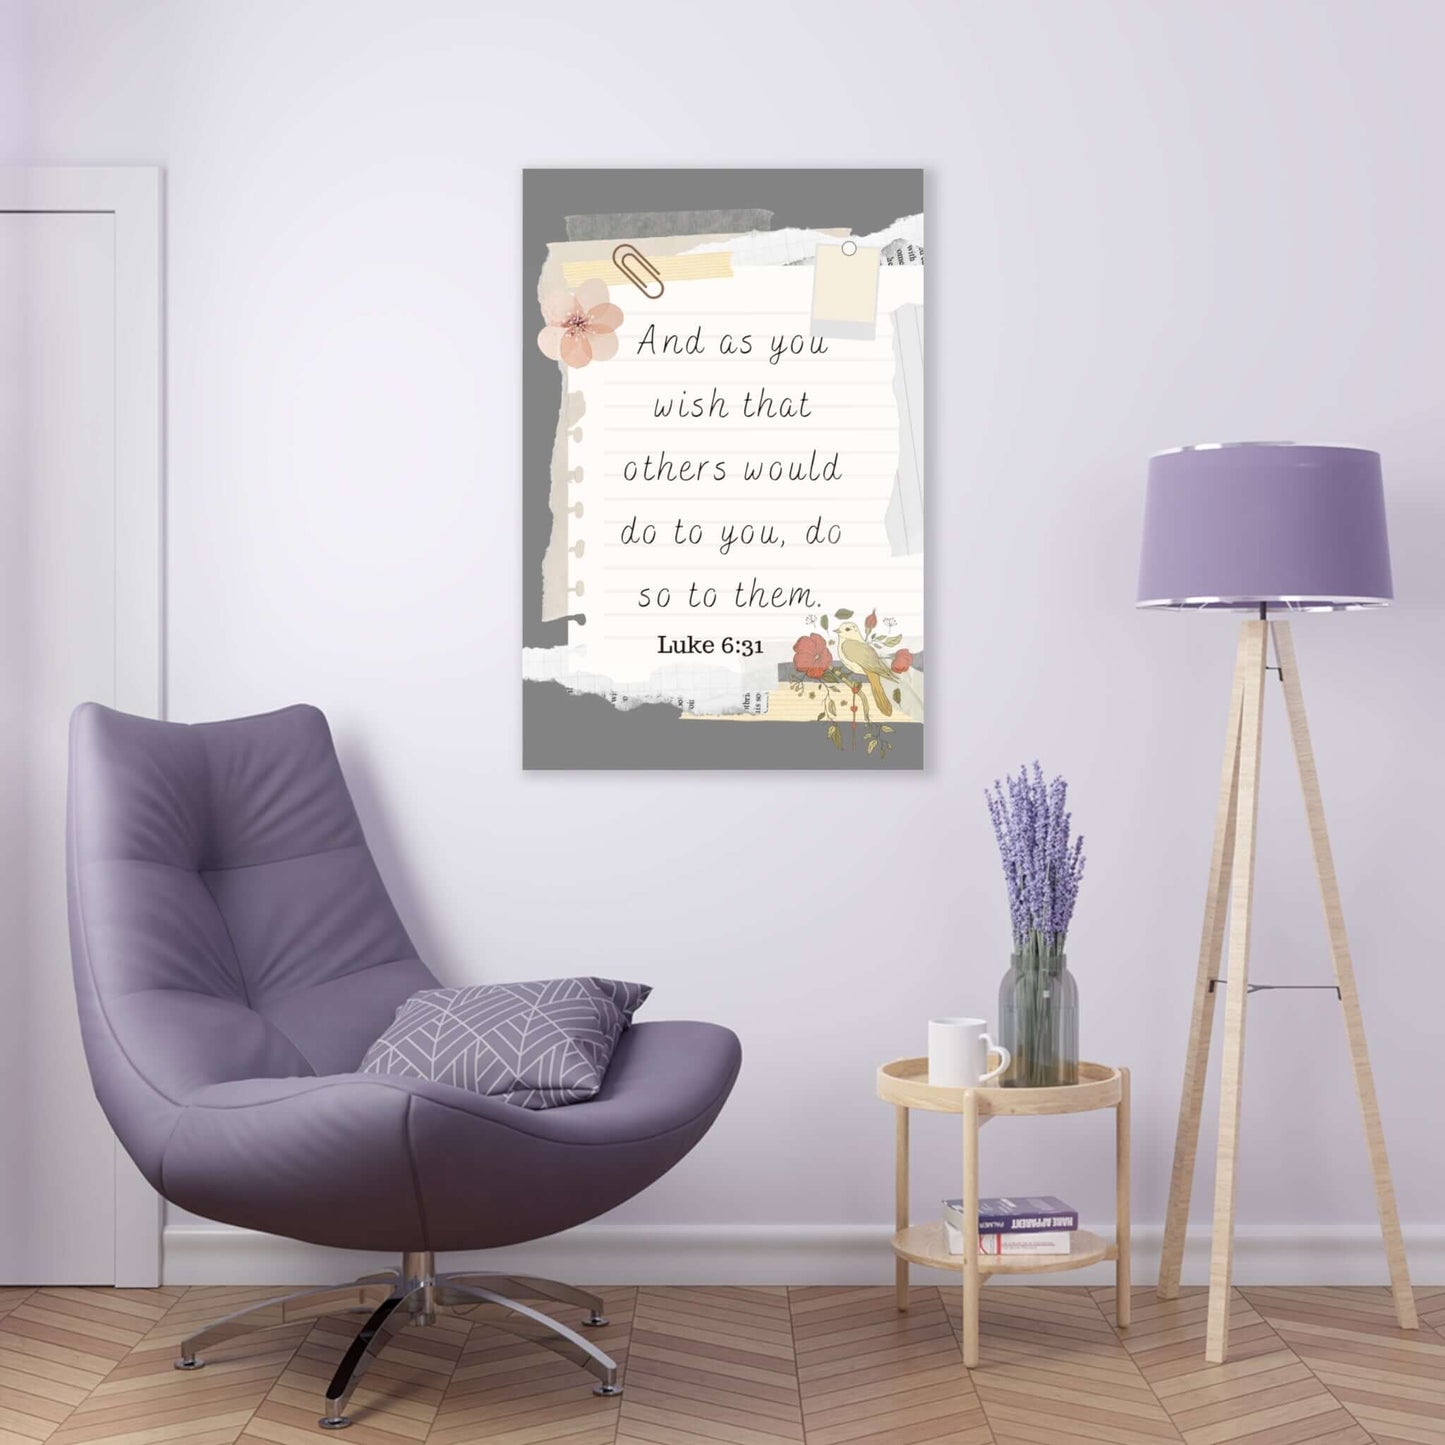 Stunning Catholic Home Decor: "Do to Others" Acrylic Wall Art Print | Art & Wall Decor,Assembled in the USA,Assembled in USA,Decor,Home & Living,Home Decor,Indoor,Made in the USA,Made in USA,Poster